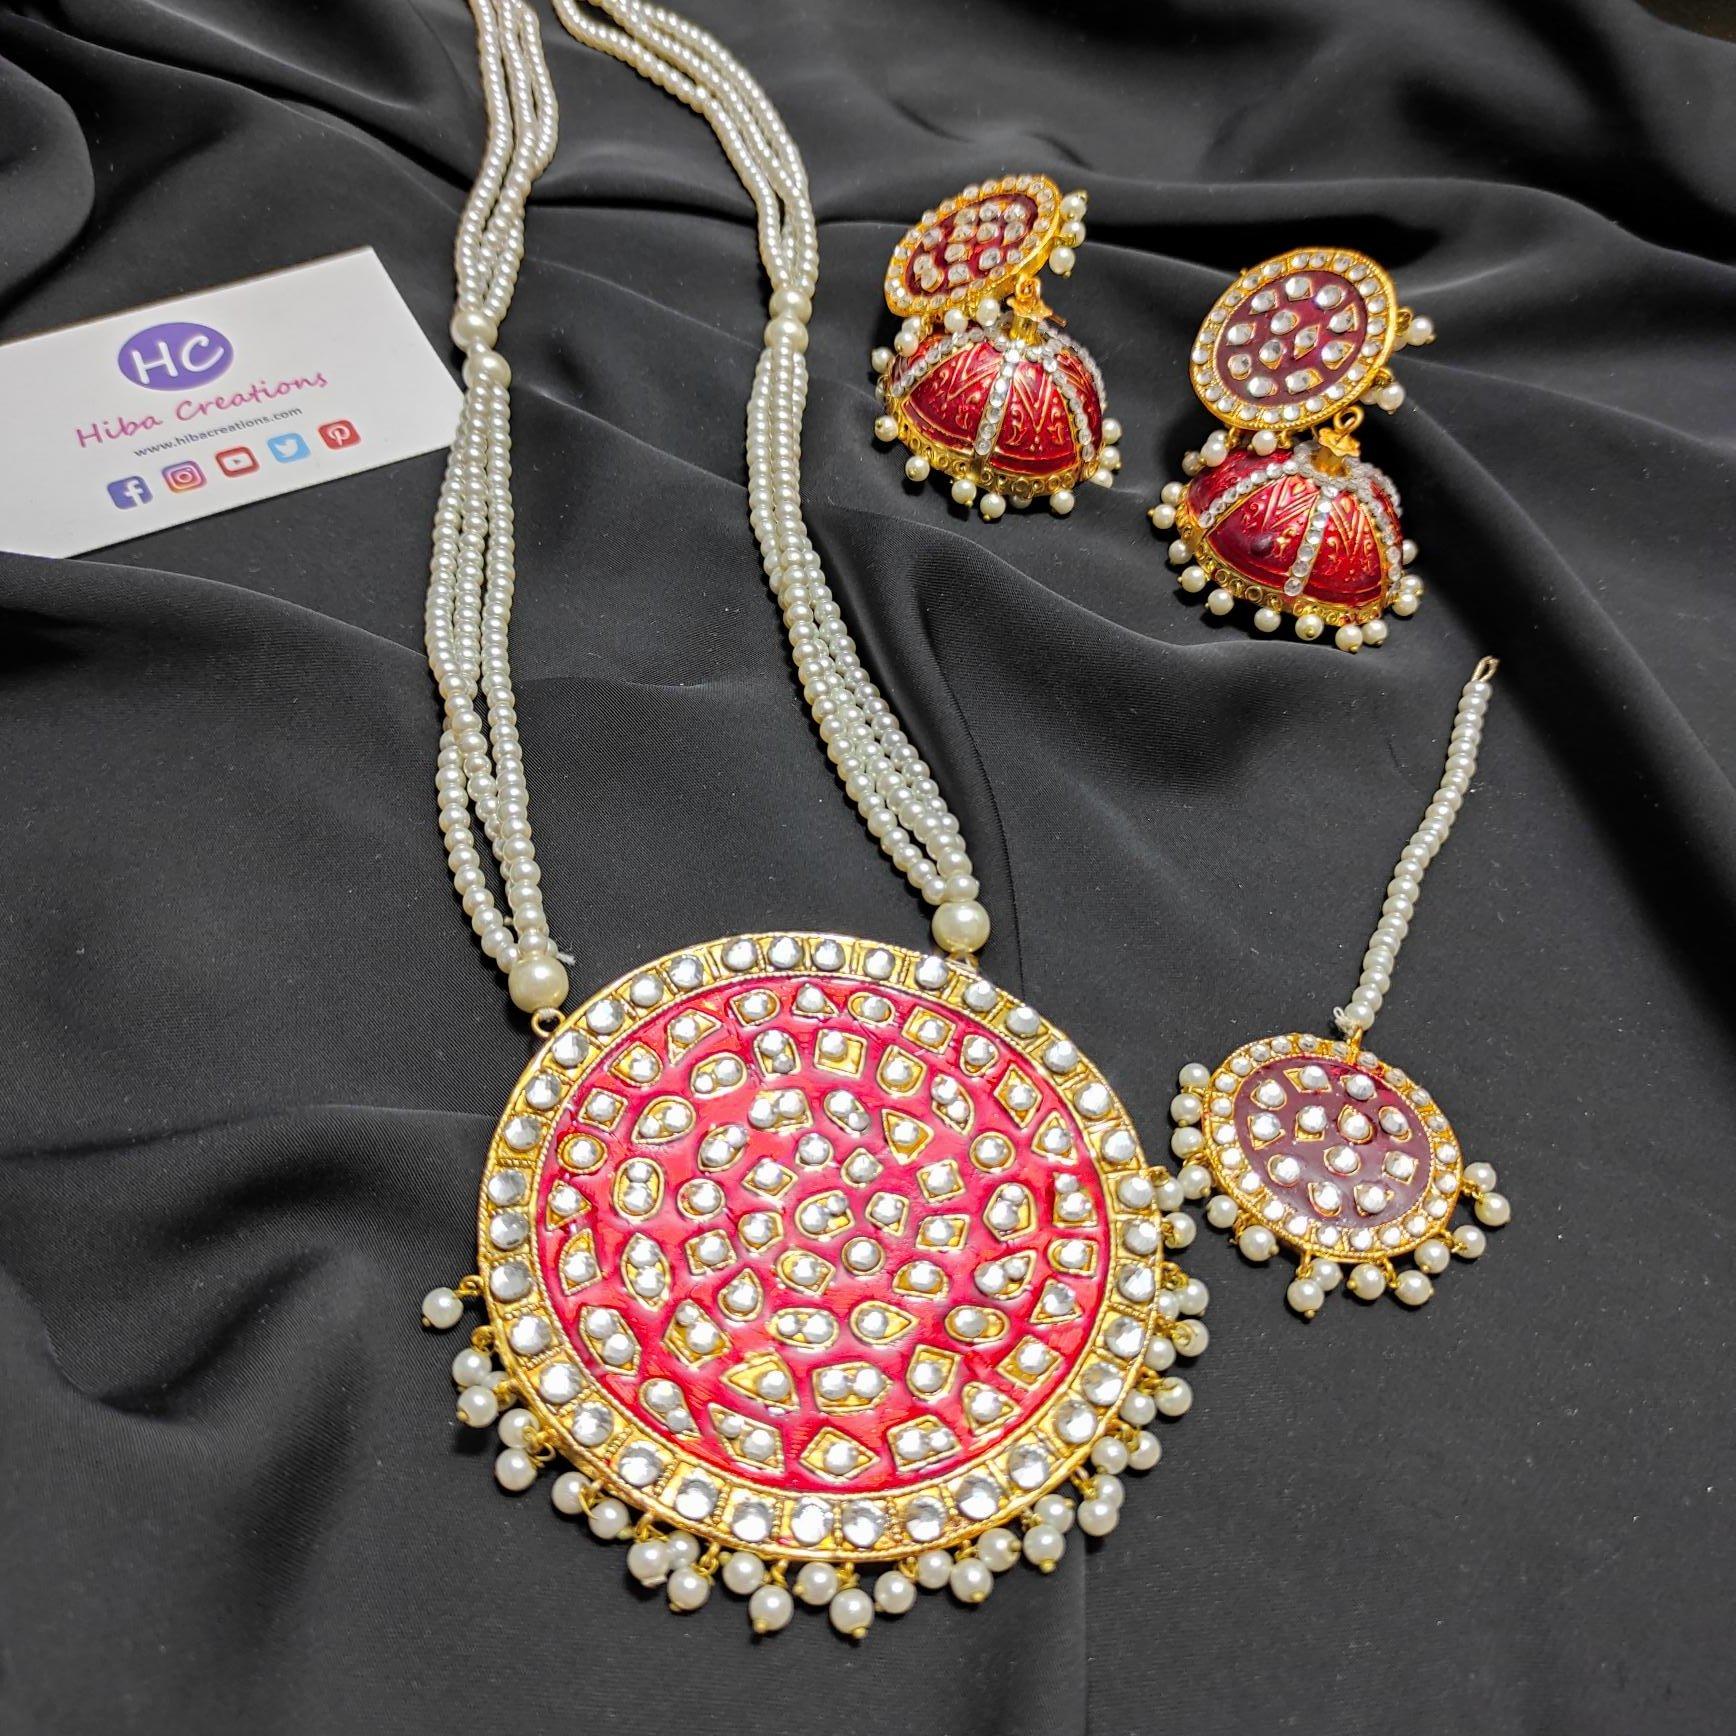 Latest Meenakari Mala with Earrings Design and Price in Pakistan Online. Cash on Delivery. New Meenakari Mala Designs 2022 Pakistan Lahore, Karachi